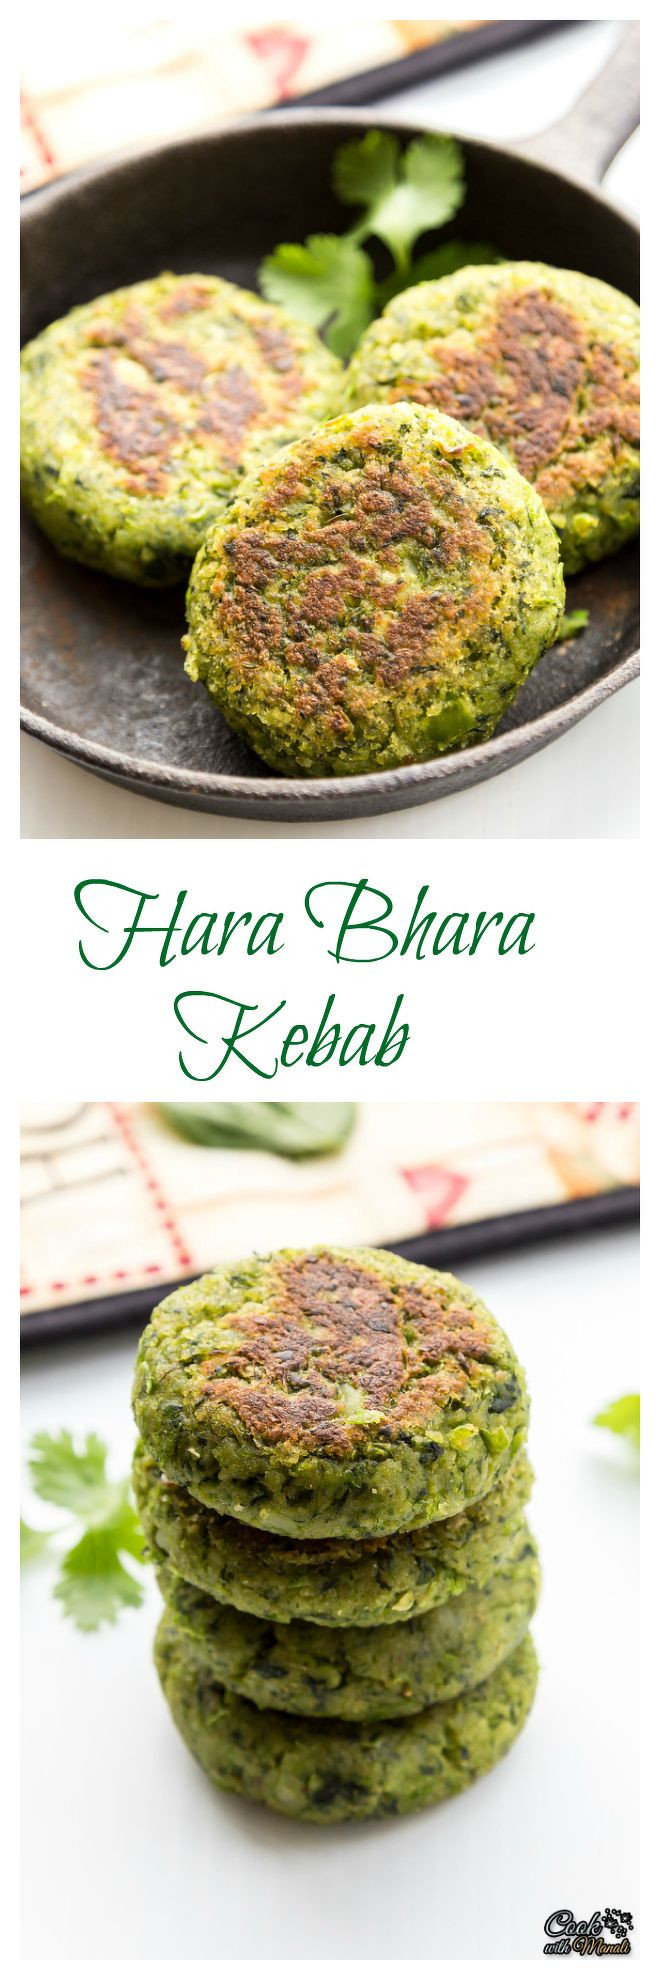 Vegan Indian Appetizers
 Kebabs made with Spinach Green Peas and Potato Full of